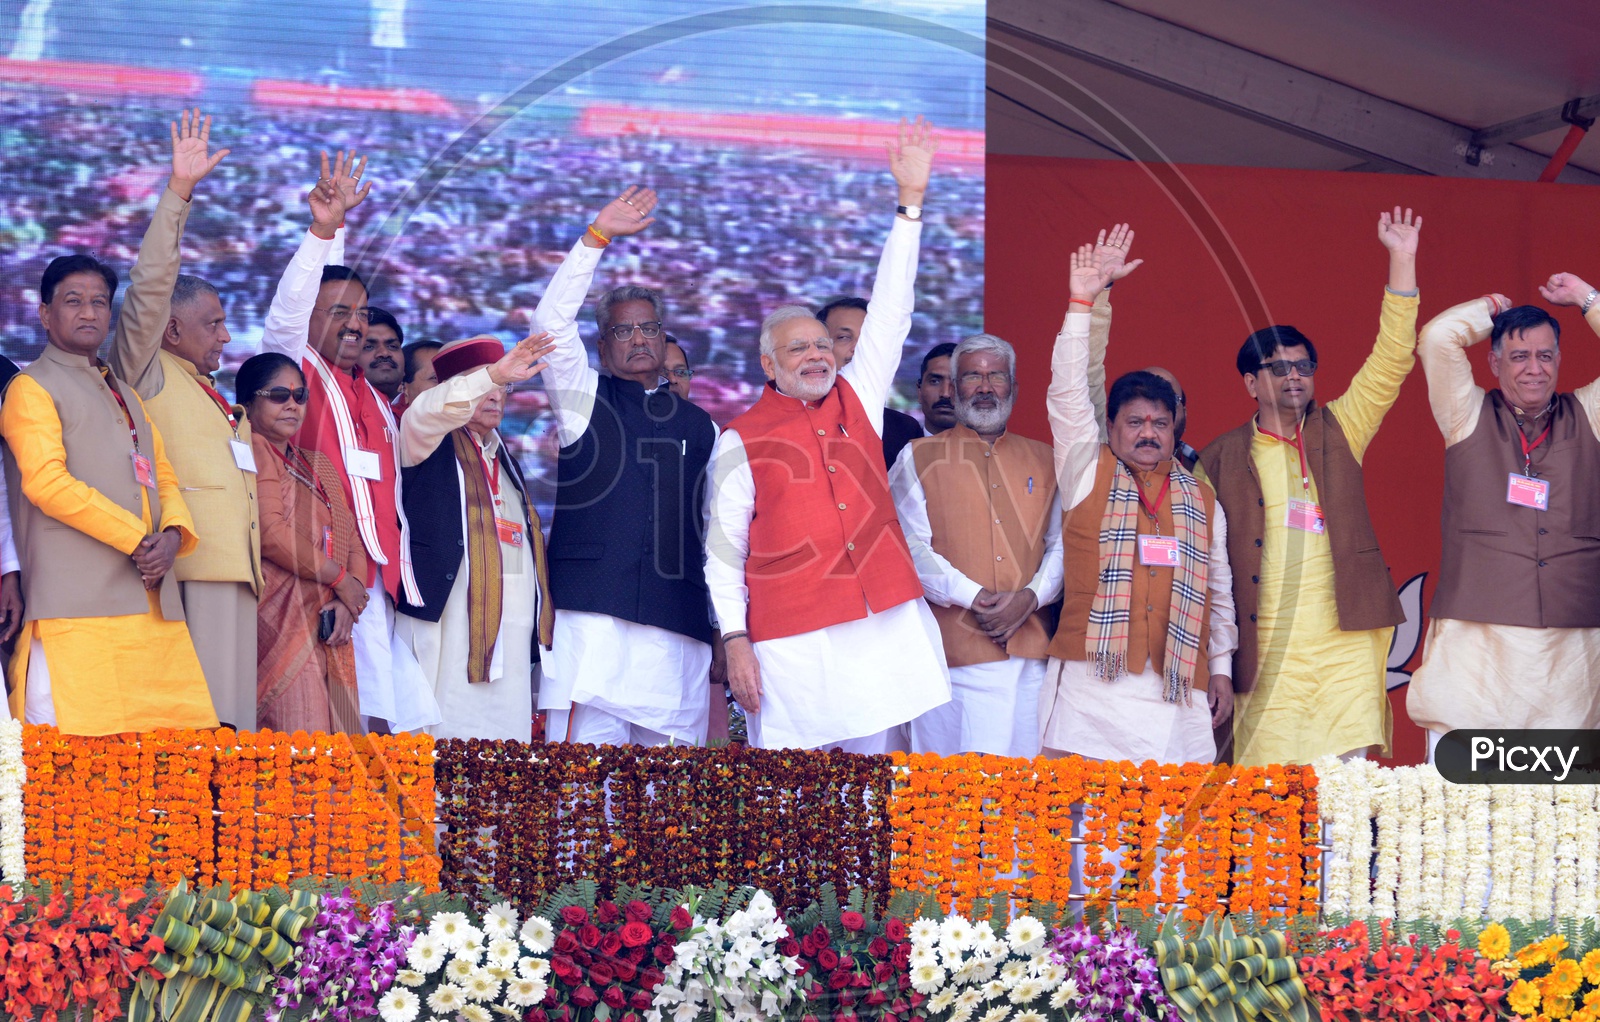 Prime Minister Narendra Modi and some of BJP leaders during Election campaign in Uttar pradesh.